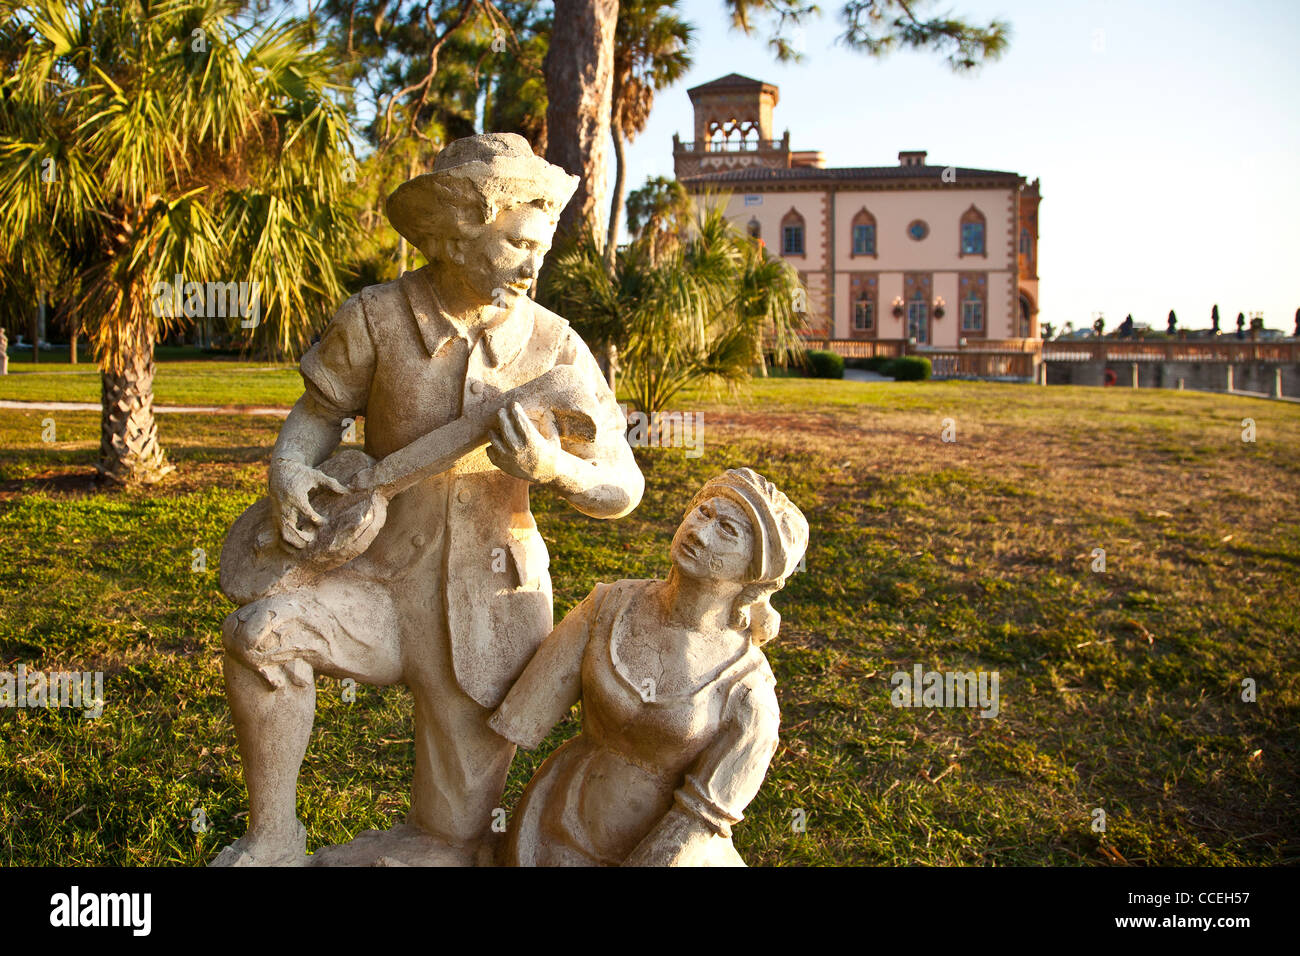 Ca' d'Zan, mansion Sarasota, Florida built in 1924-1926 by John Ringling, founder of the Ringling Brothers Circus Stock Photo